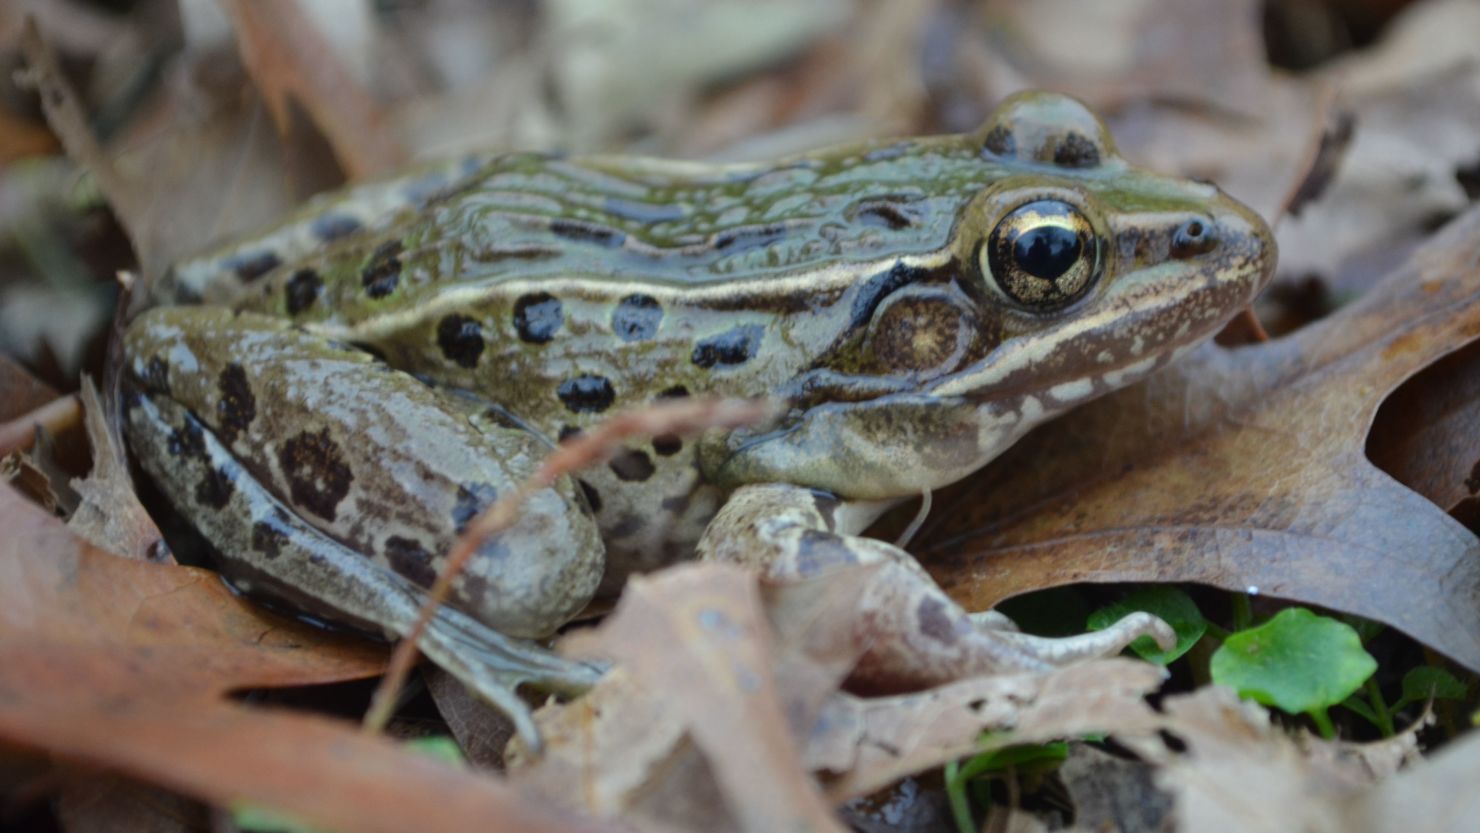 Scientists say the new leopard frog species, which is currently unnamed, has a "peculiar croak."